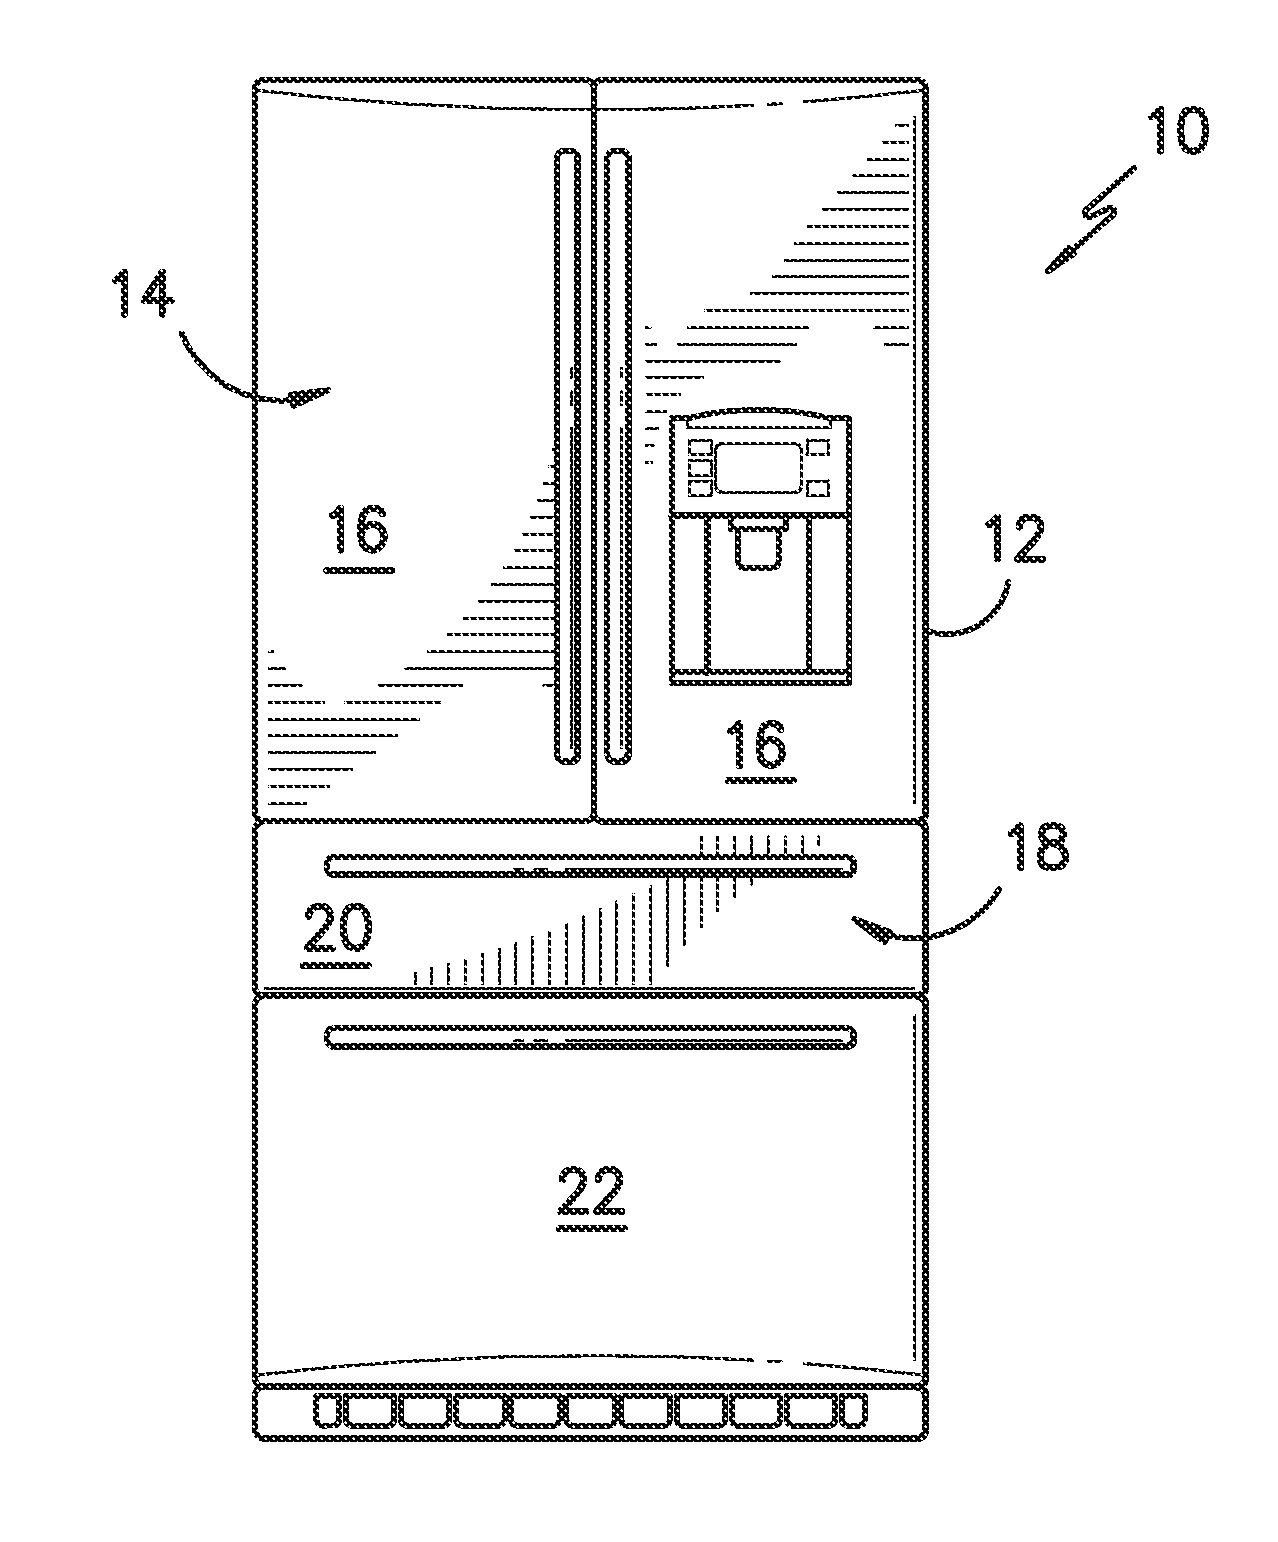 Magneto caloric device with continuous pump